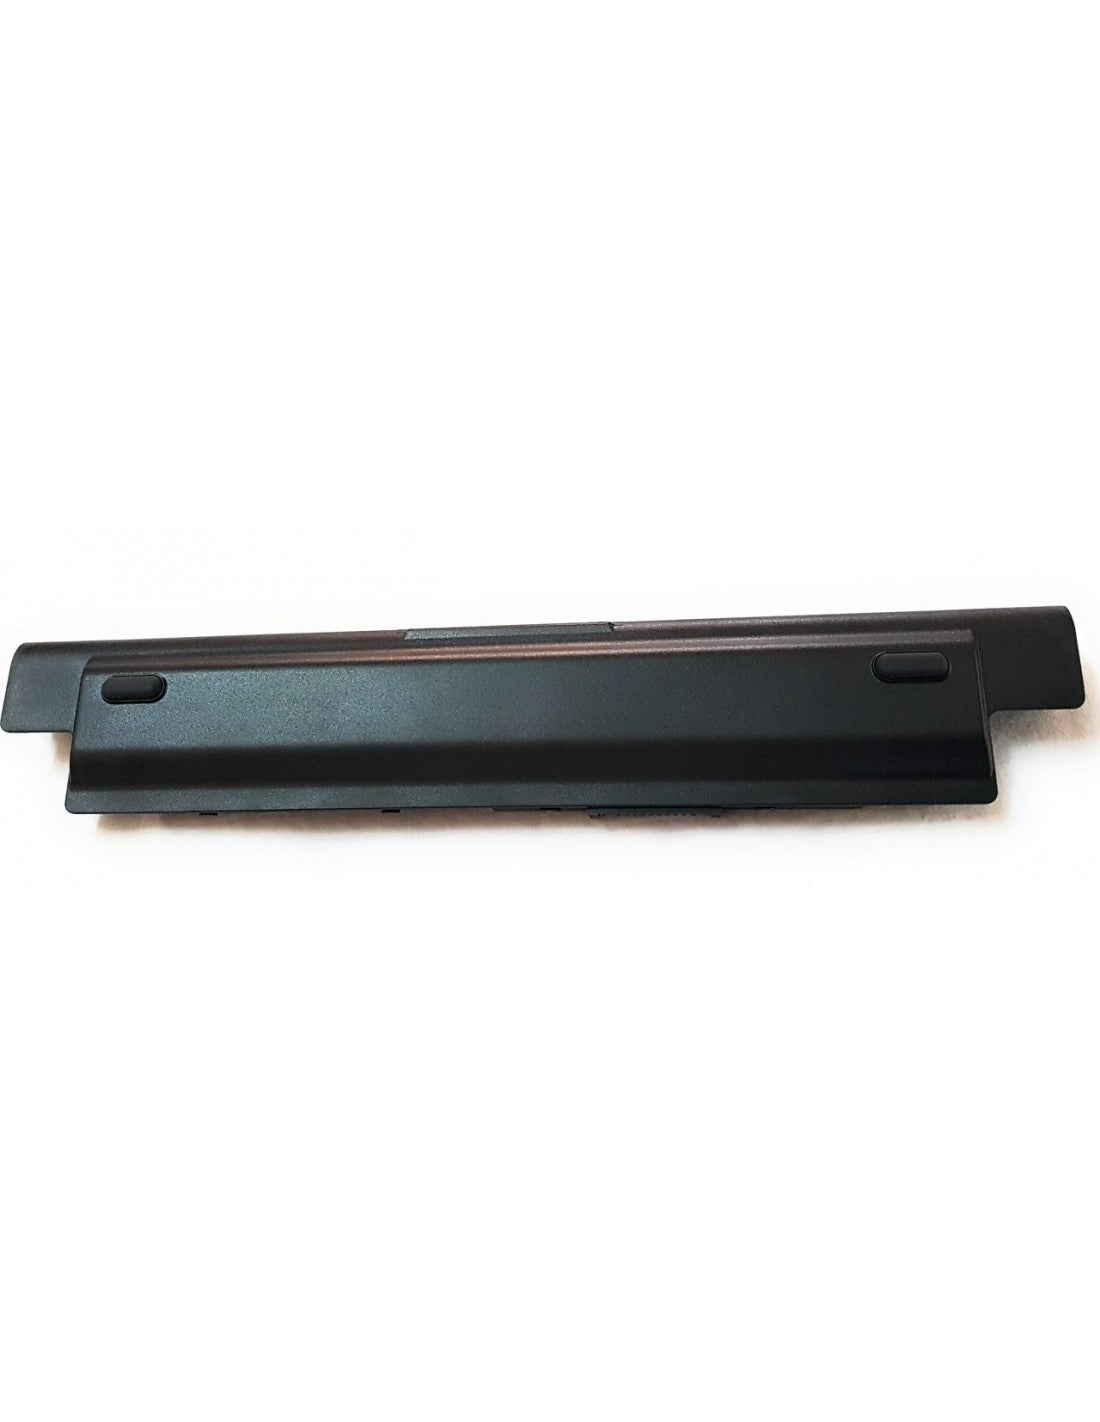 11.1V 65wh Dell Inspiron 15R 5537, 14R 5437, 15R-5537, 15R 5521, 17R 5721 Laptop Battery